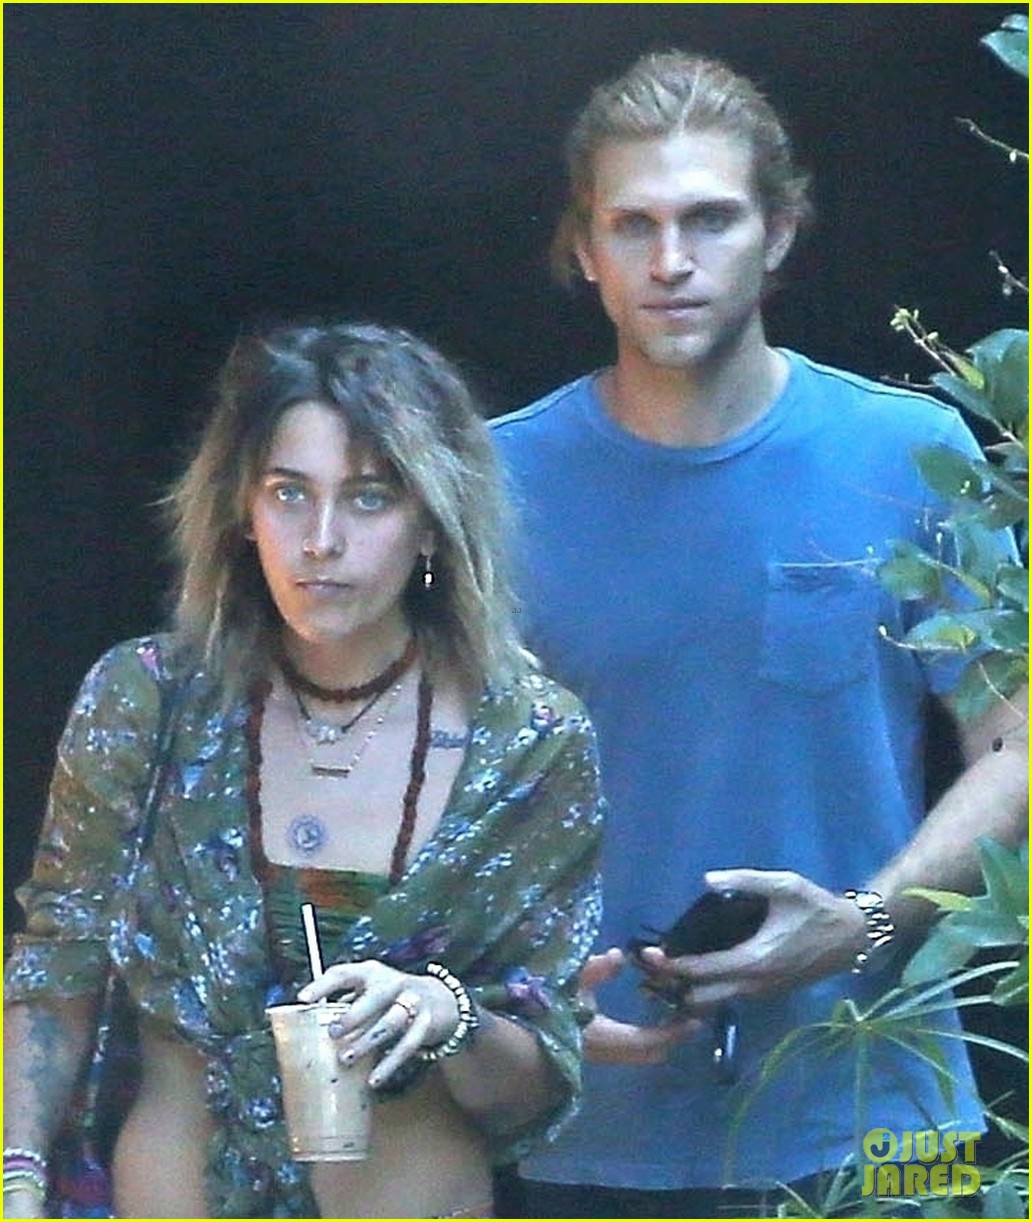 paris jackson spotted hanging out with keegan allen 02